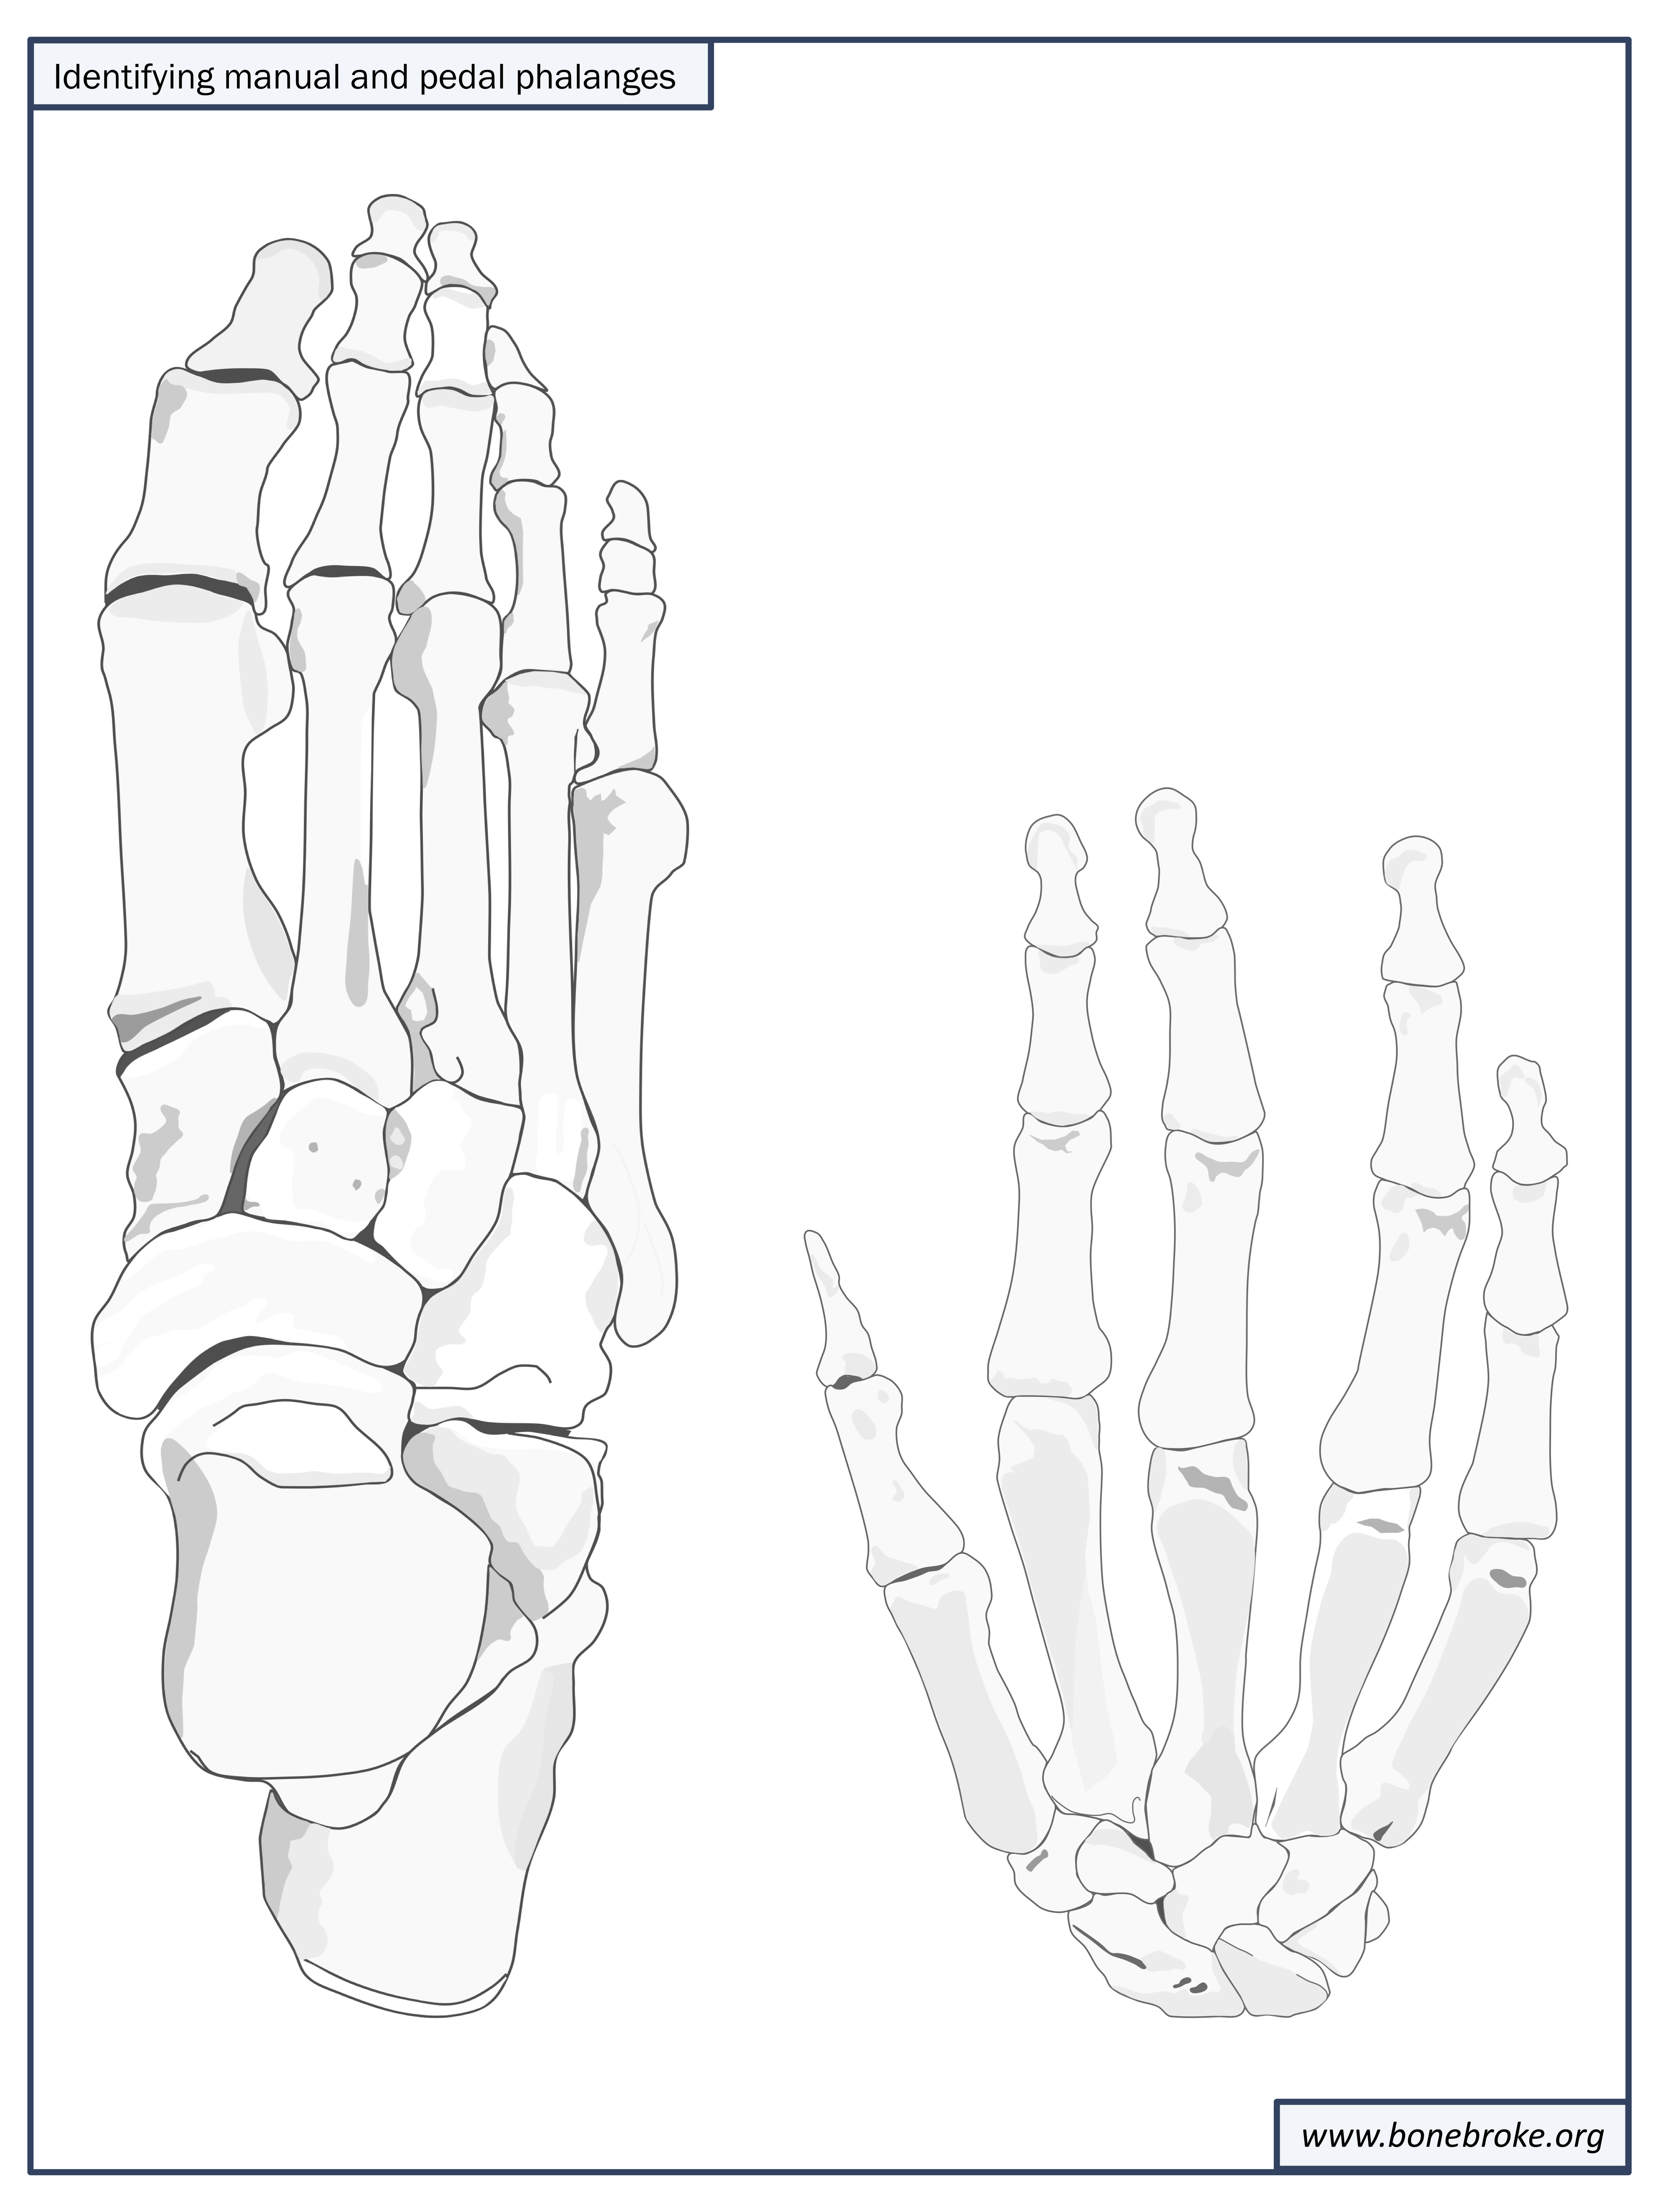 Gotta hand it to you: identifying manual and pedal phalanges | Bone Broke